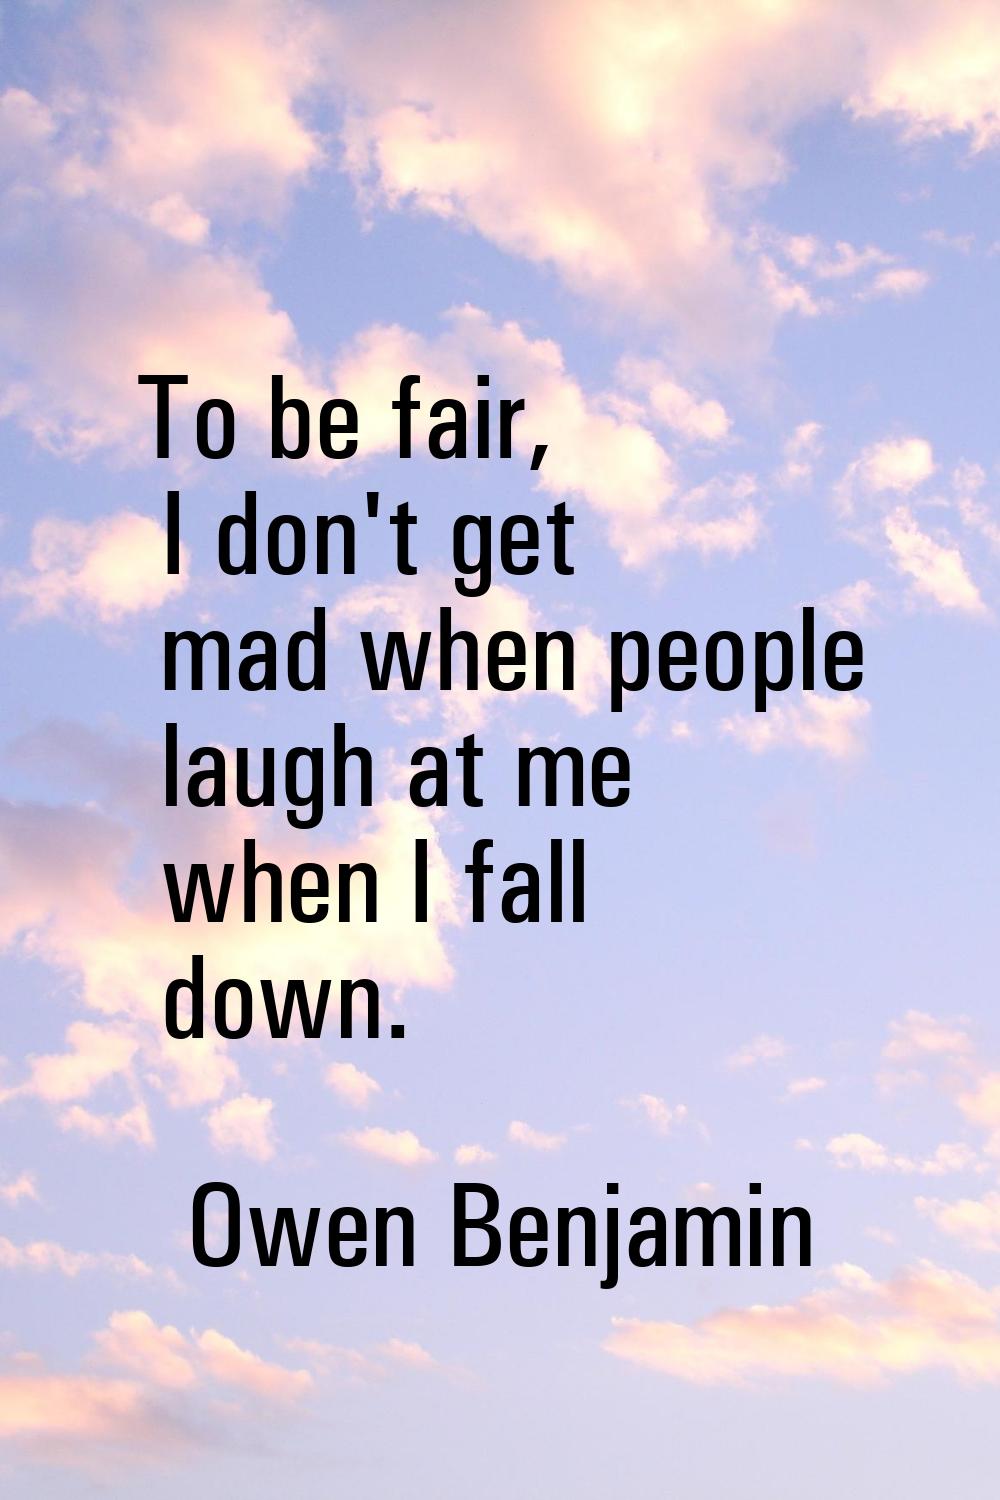 To be fair, I don't get mad when people laugh at me when I fall down.